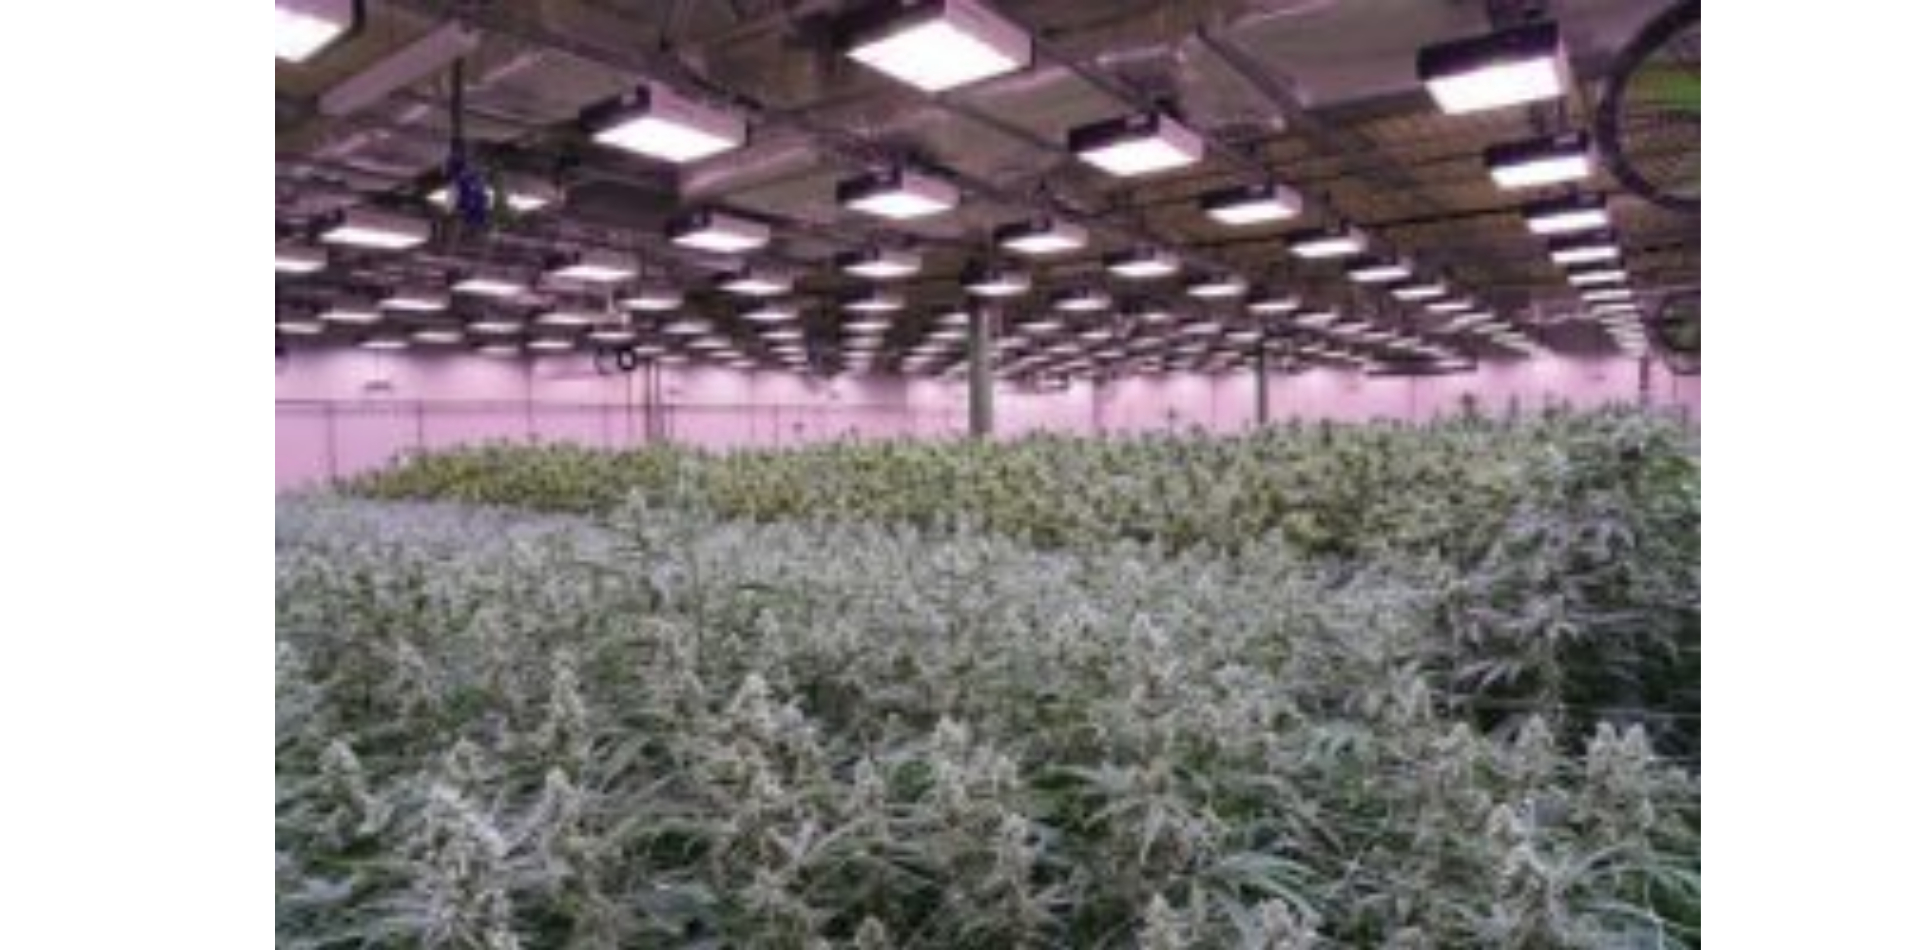 The Cannabis Cultivation Costs by State